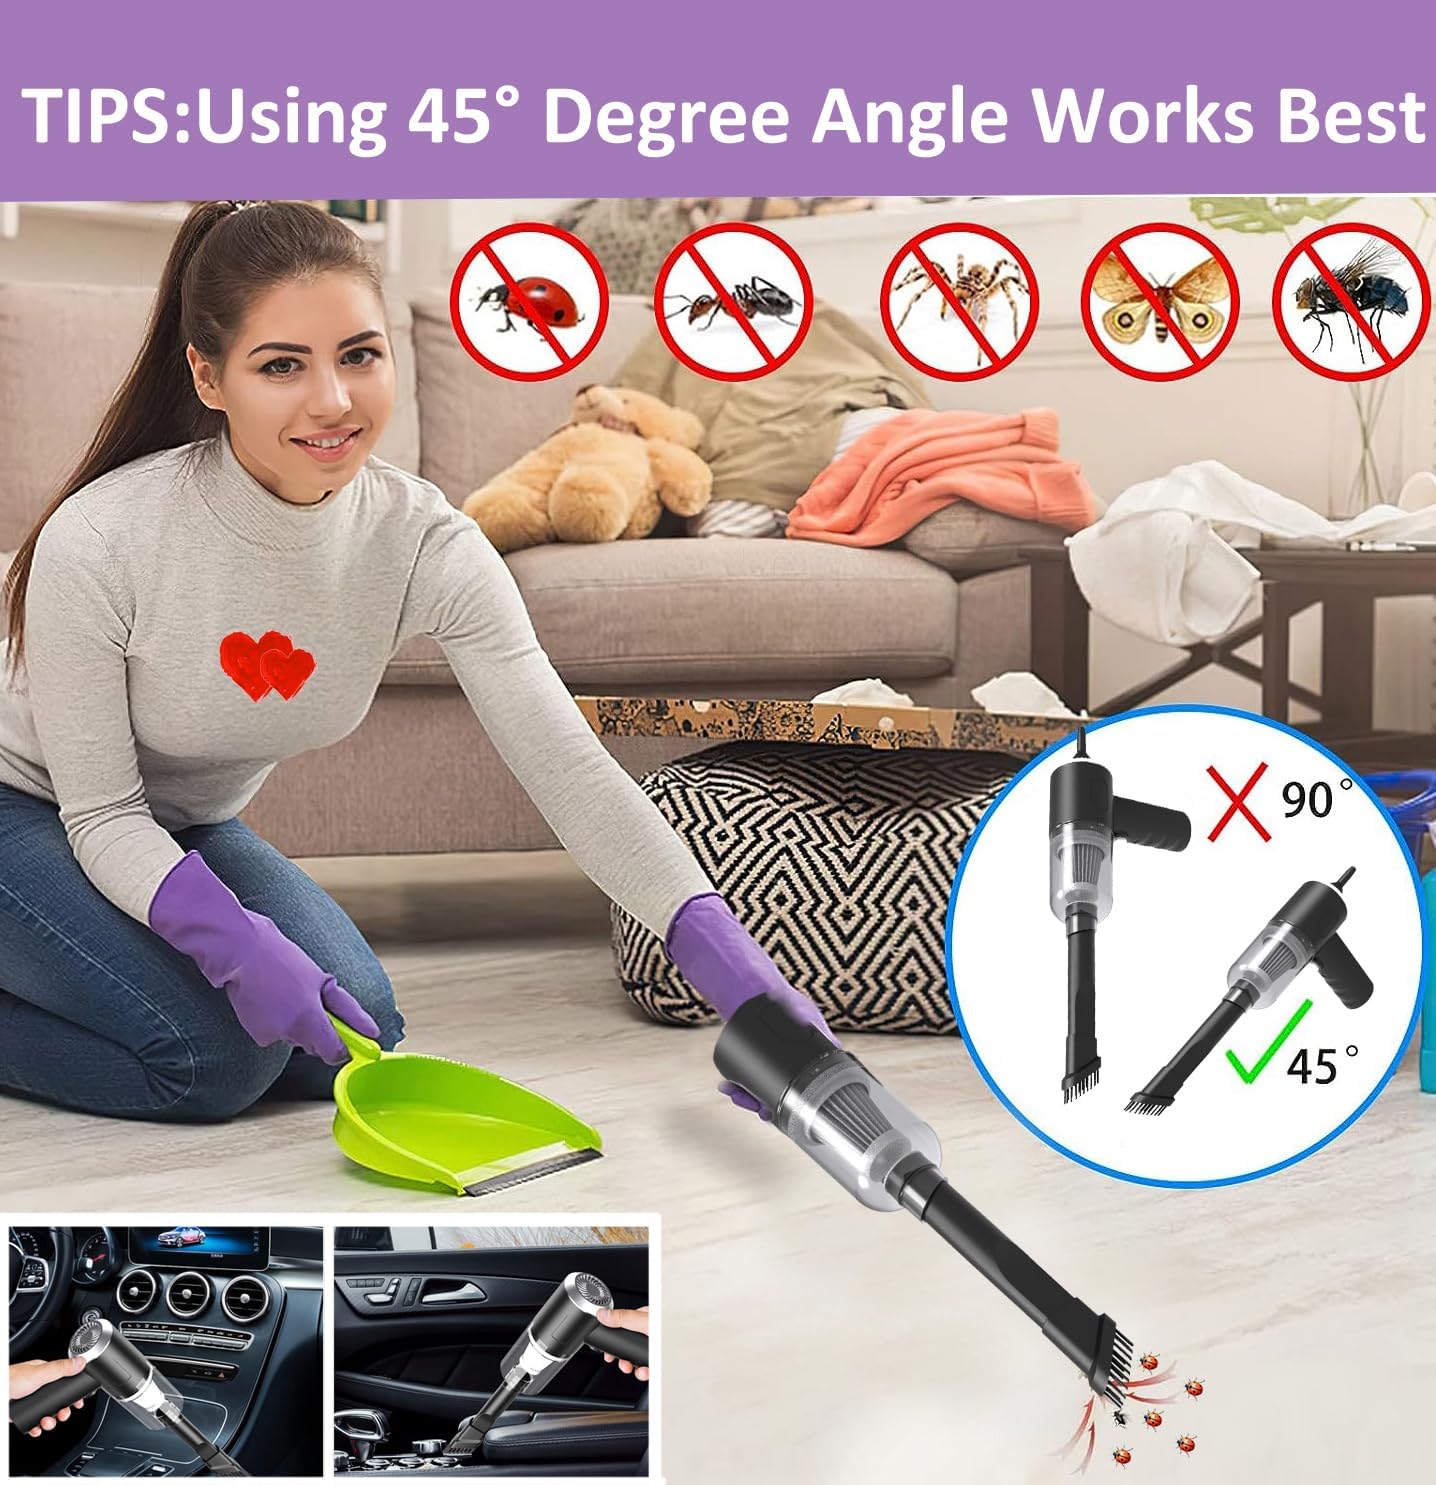 Portable Wireless Handheld Vacuum Cleaner for Car, Home & Office Cleaning